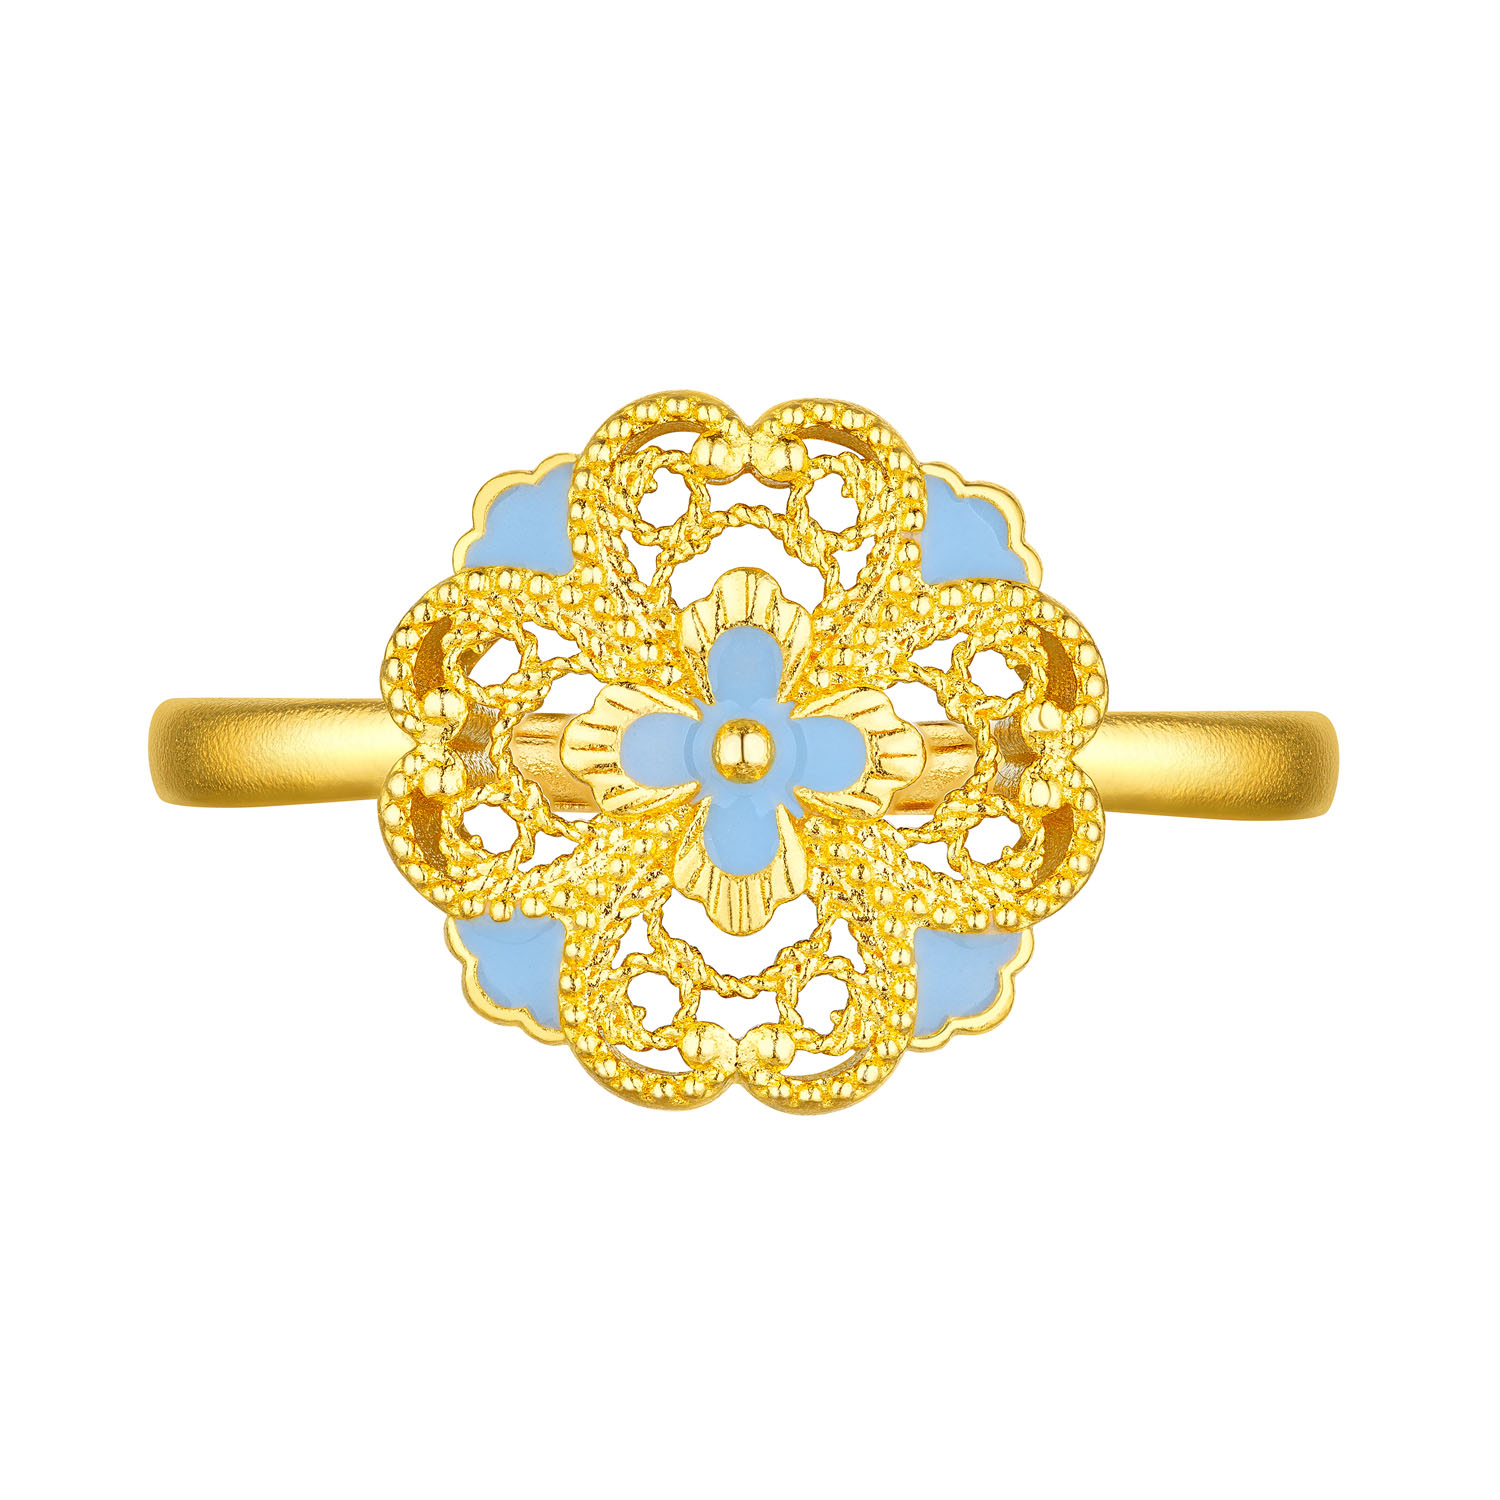 Heirloom Fortune - Charm of Song Dynasty Collection "Blue Floral Rhythm" Gold Ring